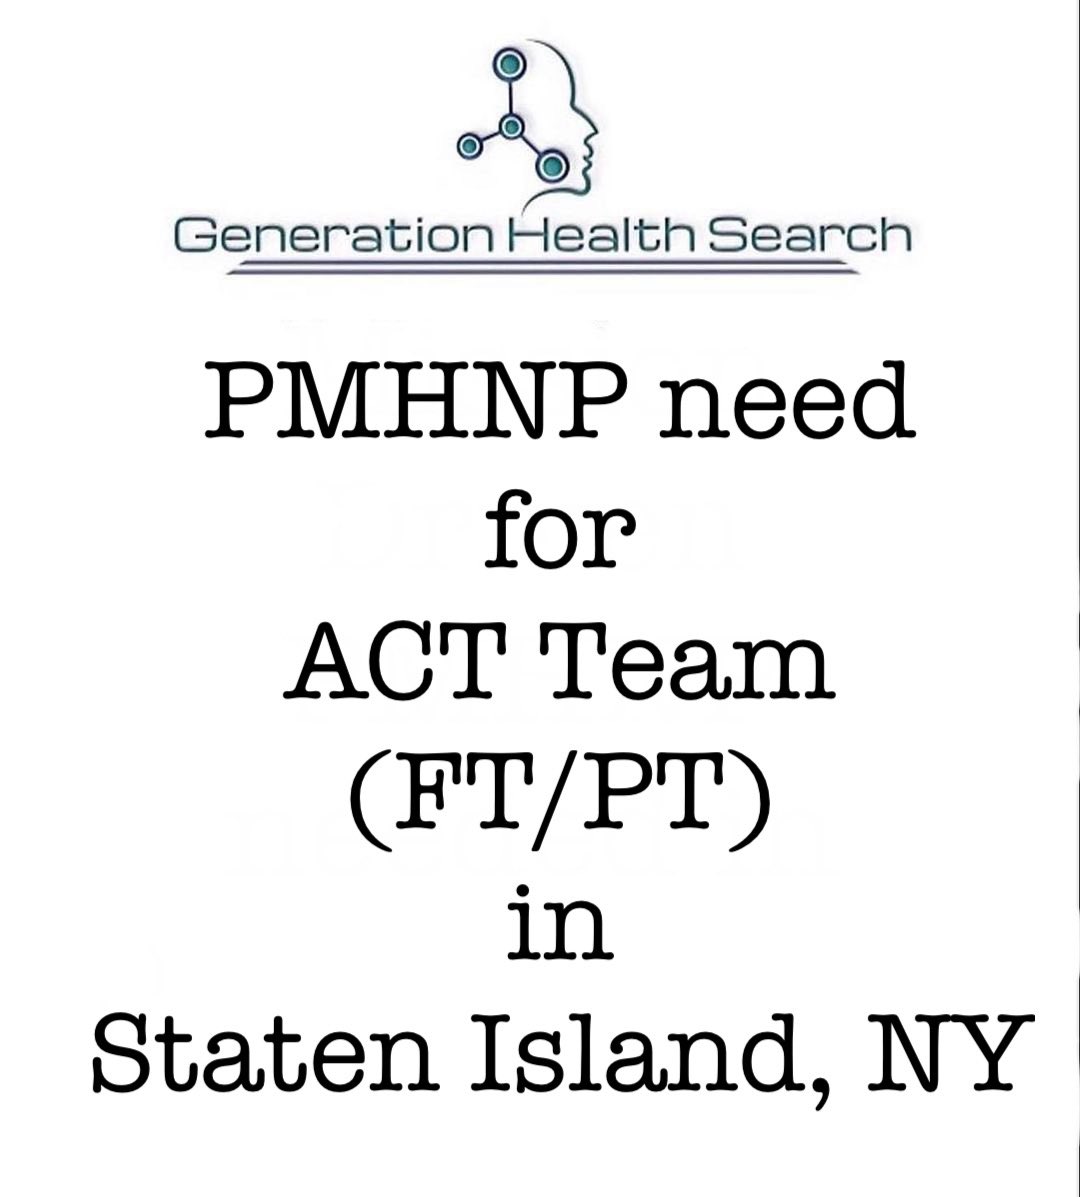 🔍 Join Our Team! PMHNP Needed for ACT Team on Staten Island. Competitive salary: $130,000.00 - $150,000.00 per year. Please share your updated CV/resume and relevant certifications with our recruitment team at recruiting@generationhealthsearch.com. #PMHNP #StatenIsland